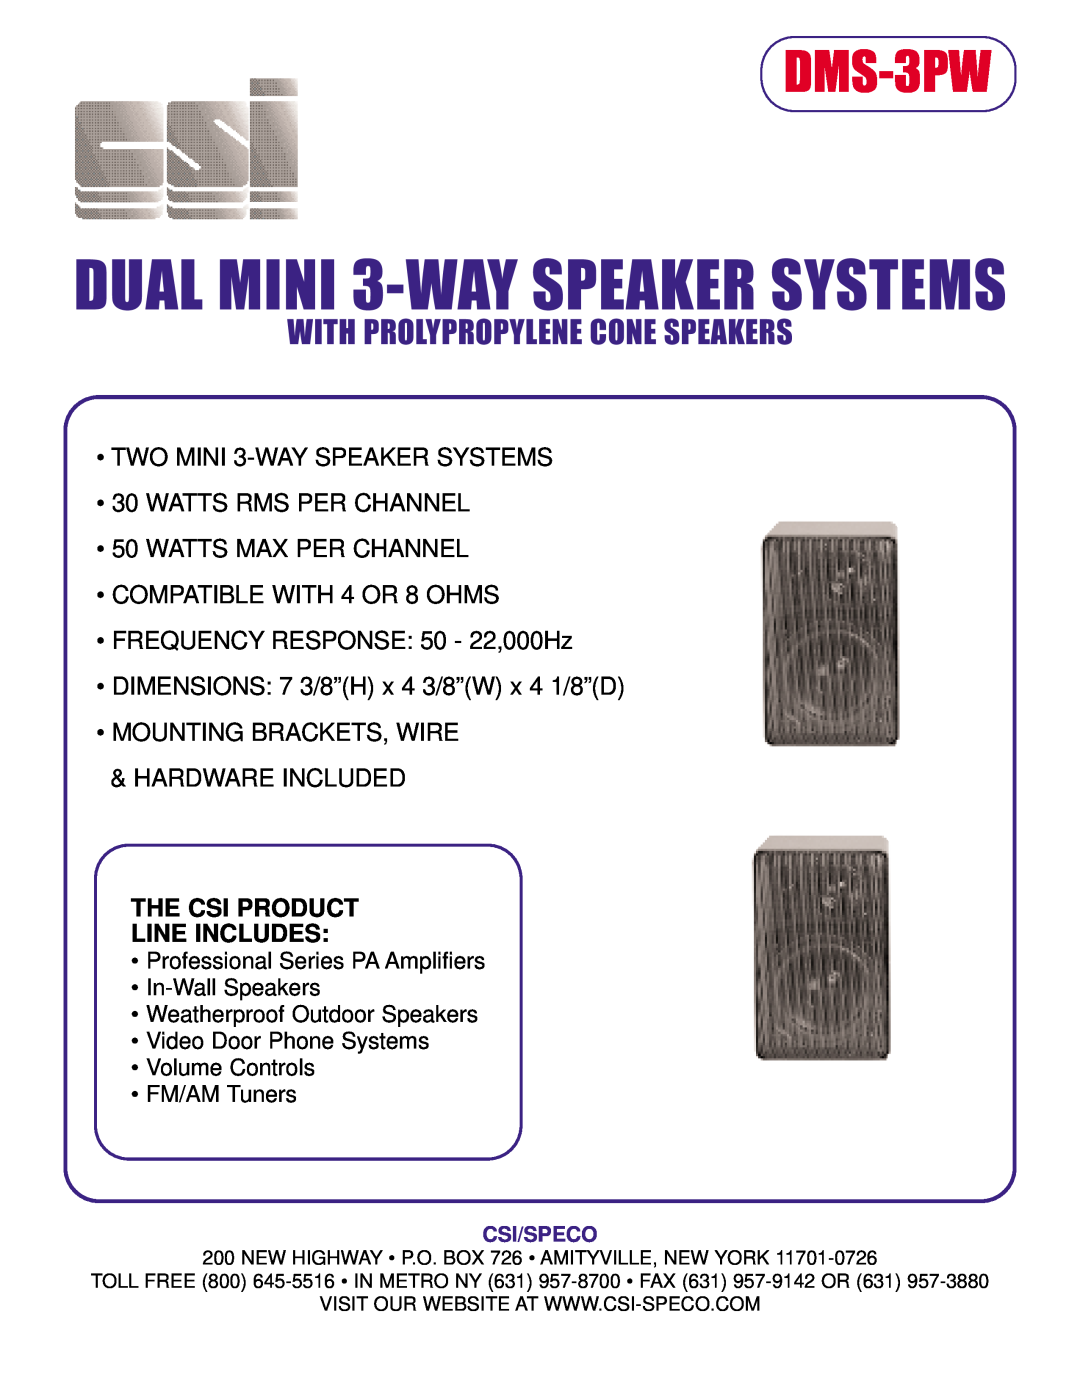 Speco Technologies DMS-3PW dimensions DUAL MINI 3-WAYSPEAKER SYSTEMS, With Prolypropylene Cone Speakers 